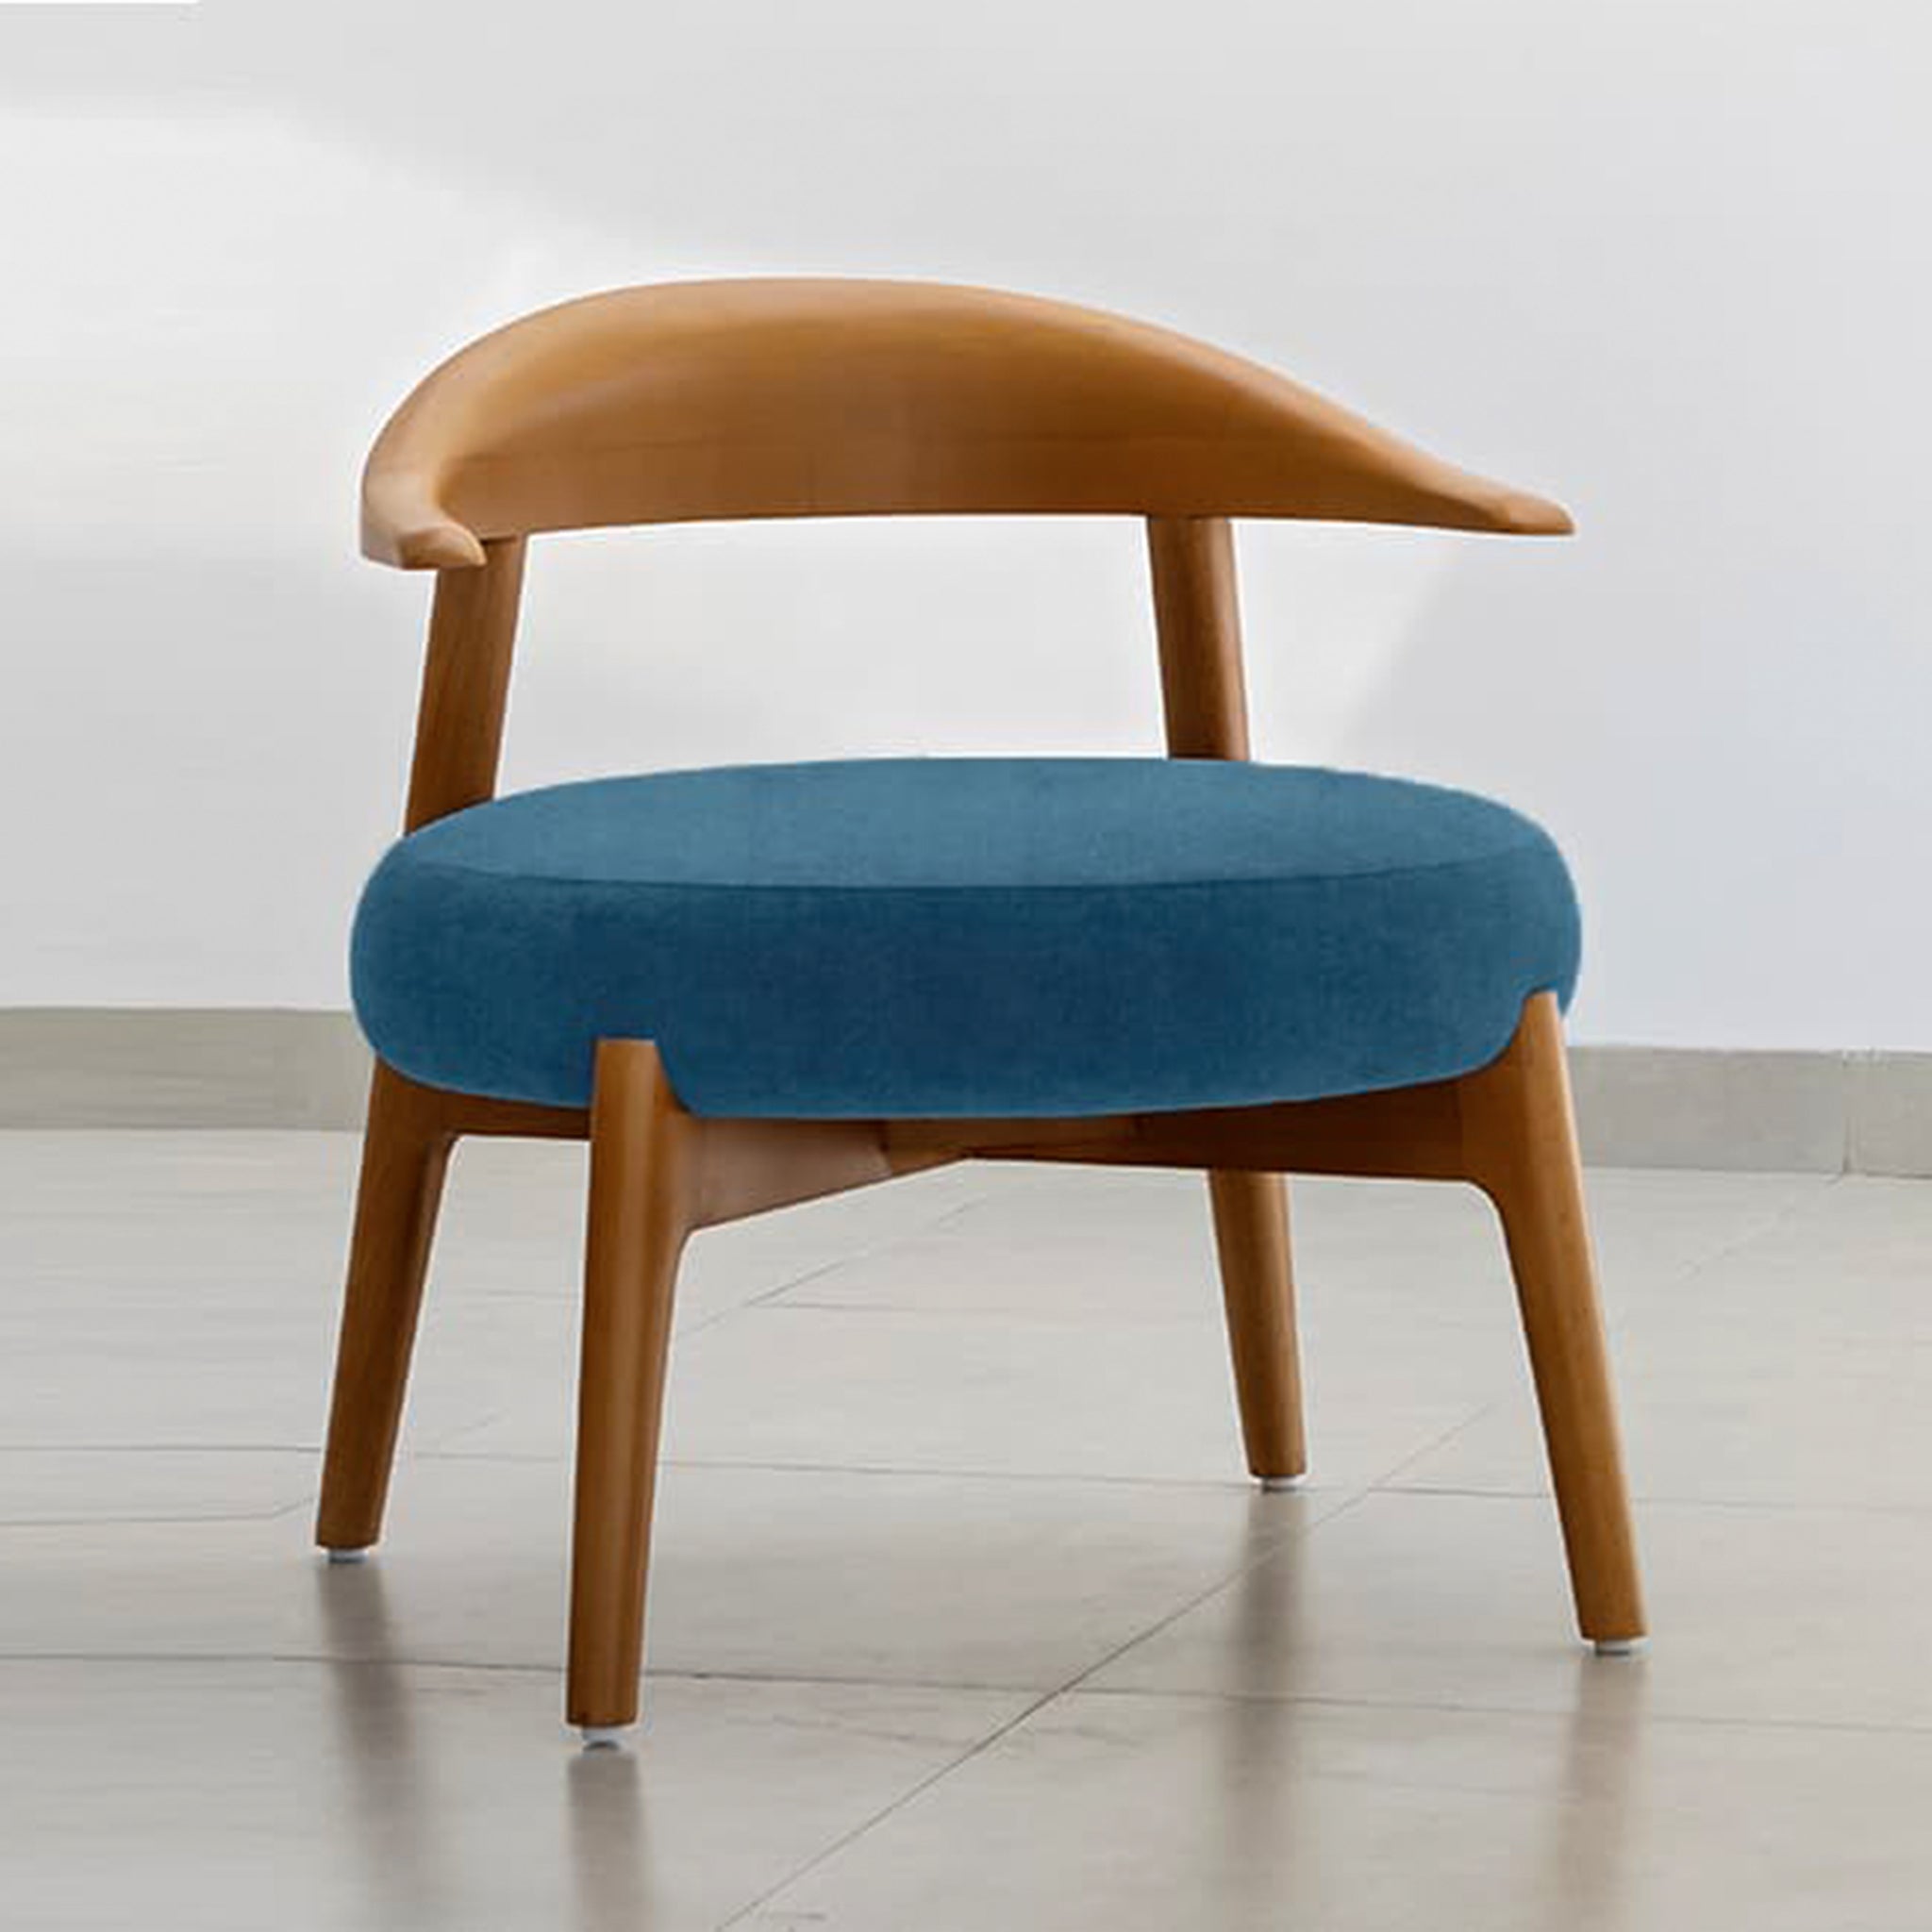 "The Hyde Accent Chair with a unique wooden design and cushioned seat"